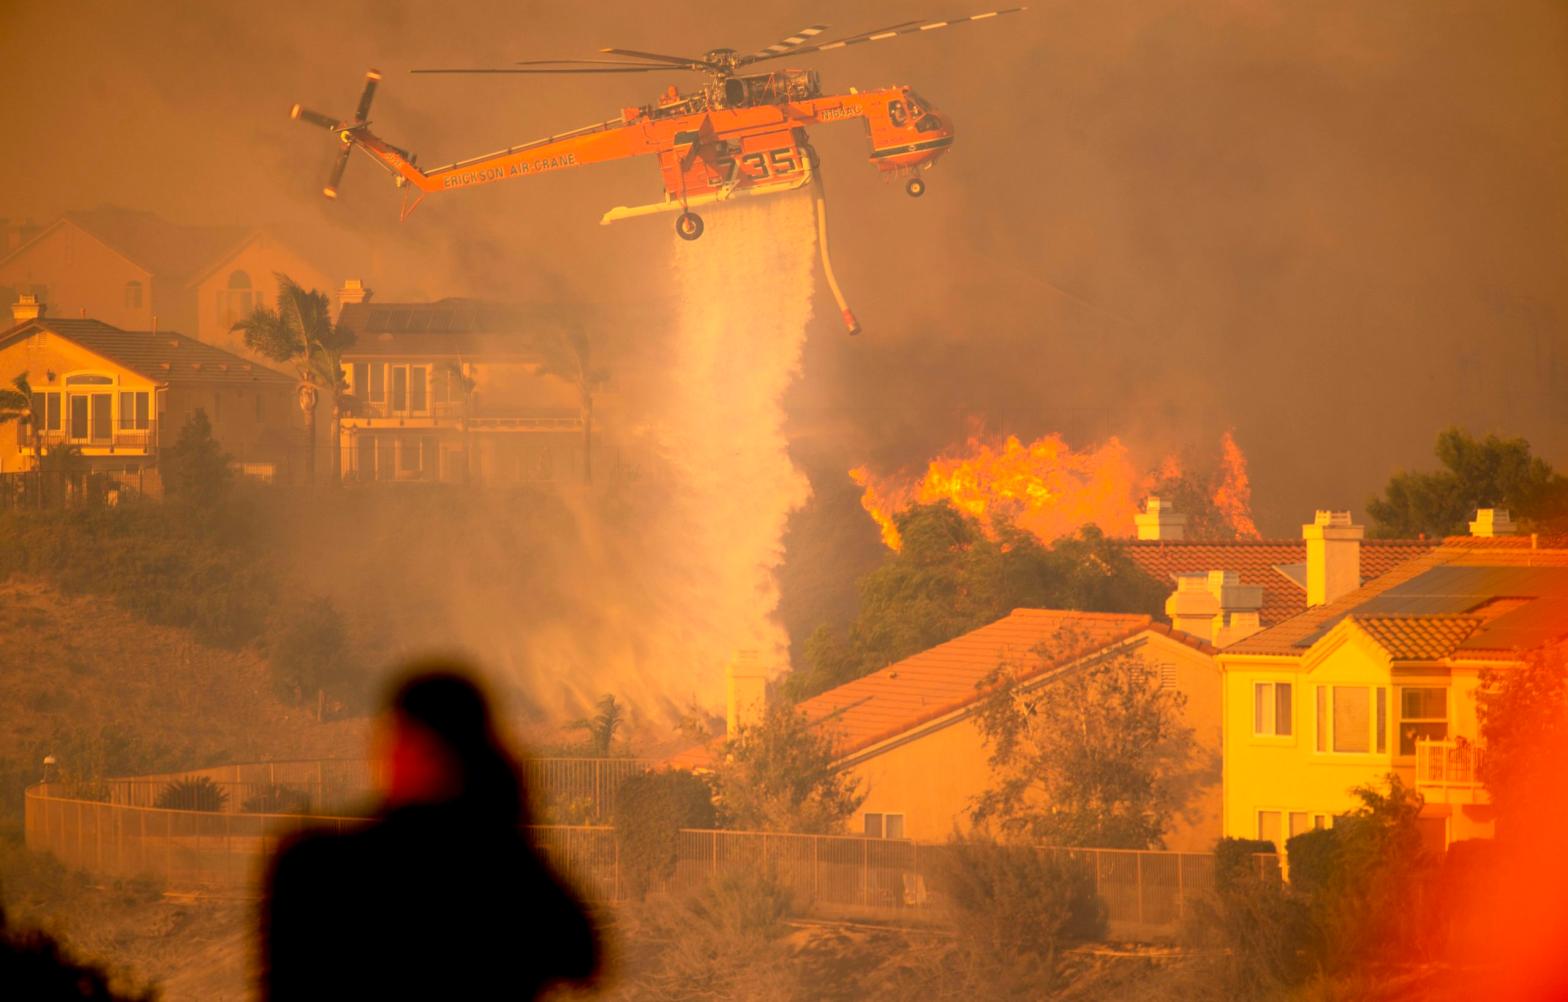 A helicopter drops water to help fight flames as the Saddleridge Fire in the Porter Ranch section of Los Angeles, California on October 11, 2019.  (Photo: Josh Edelson, Getty Images)